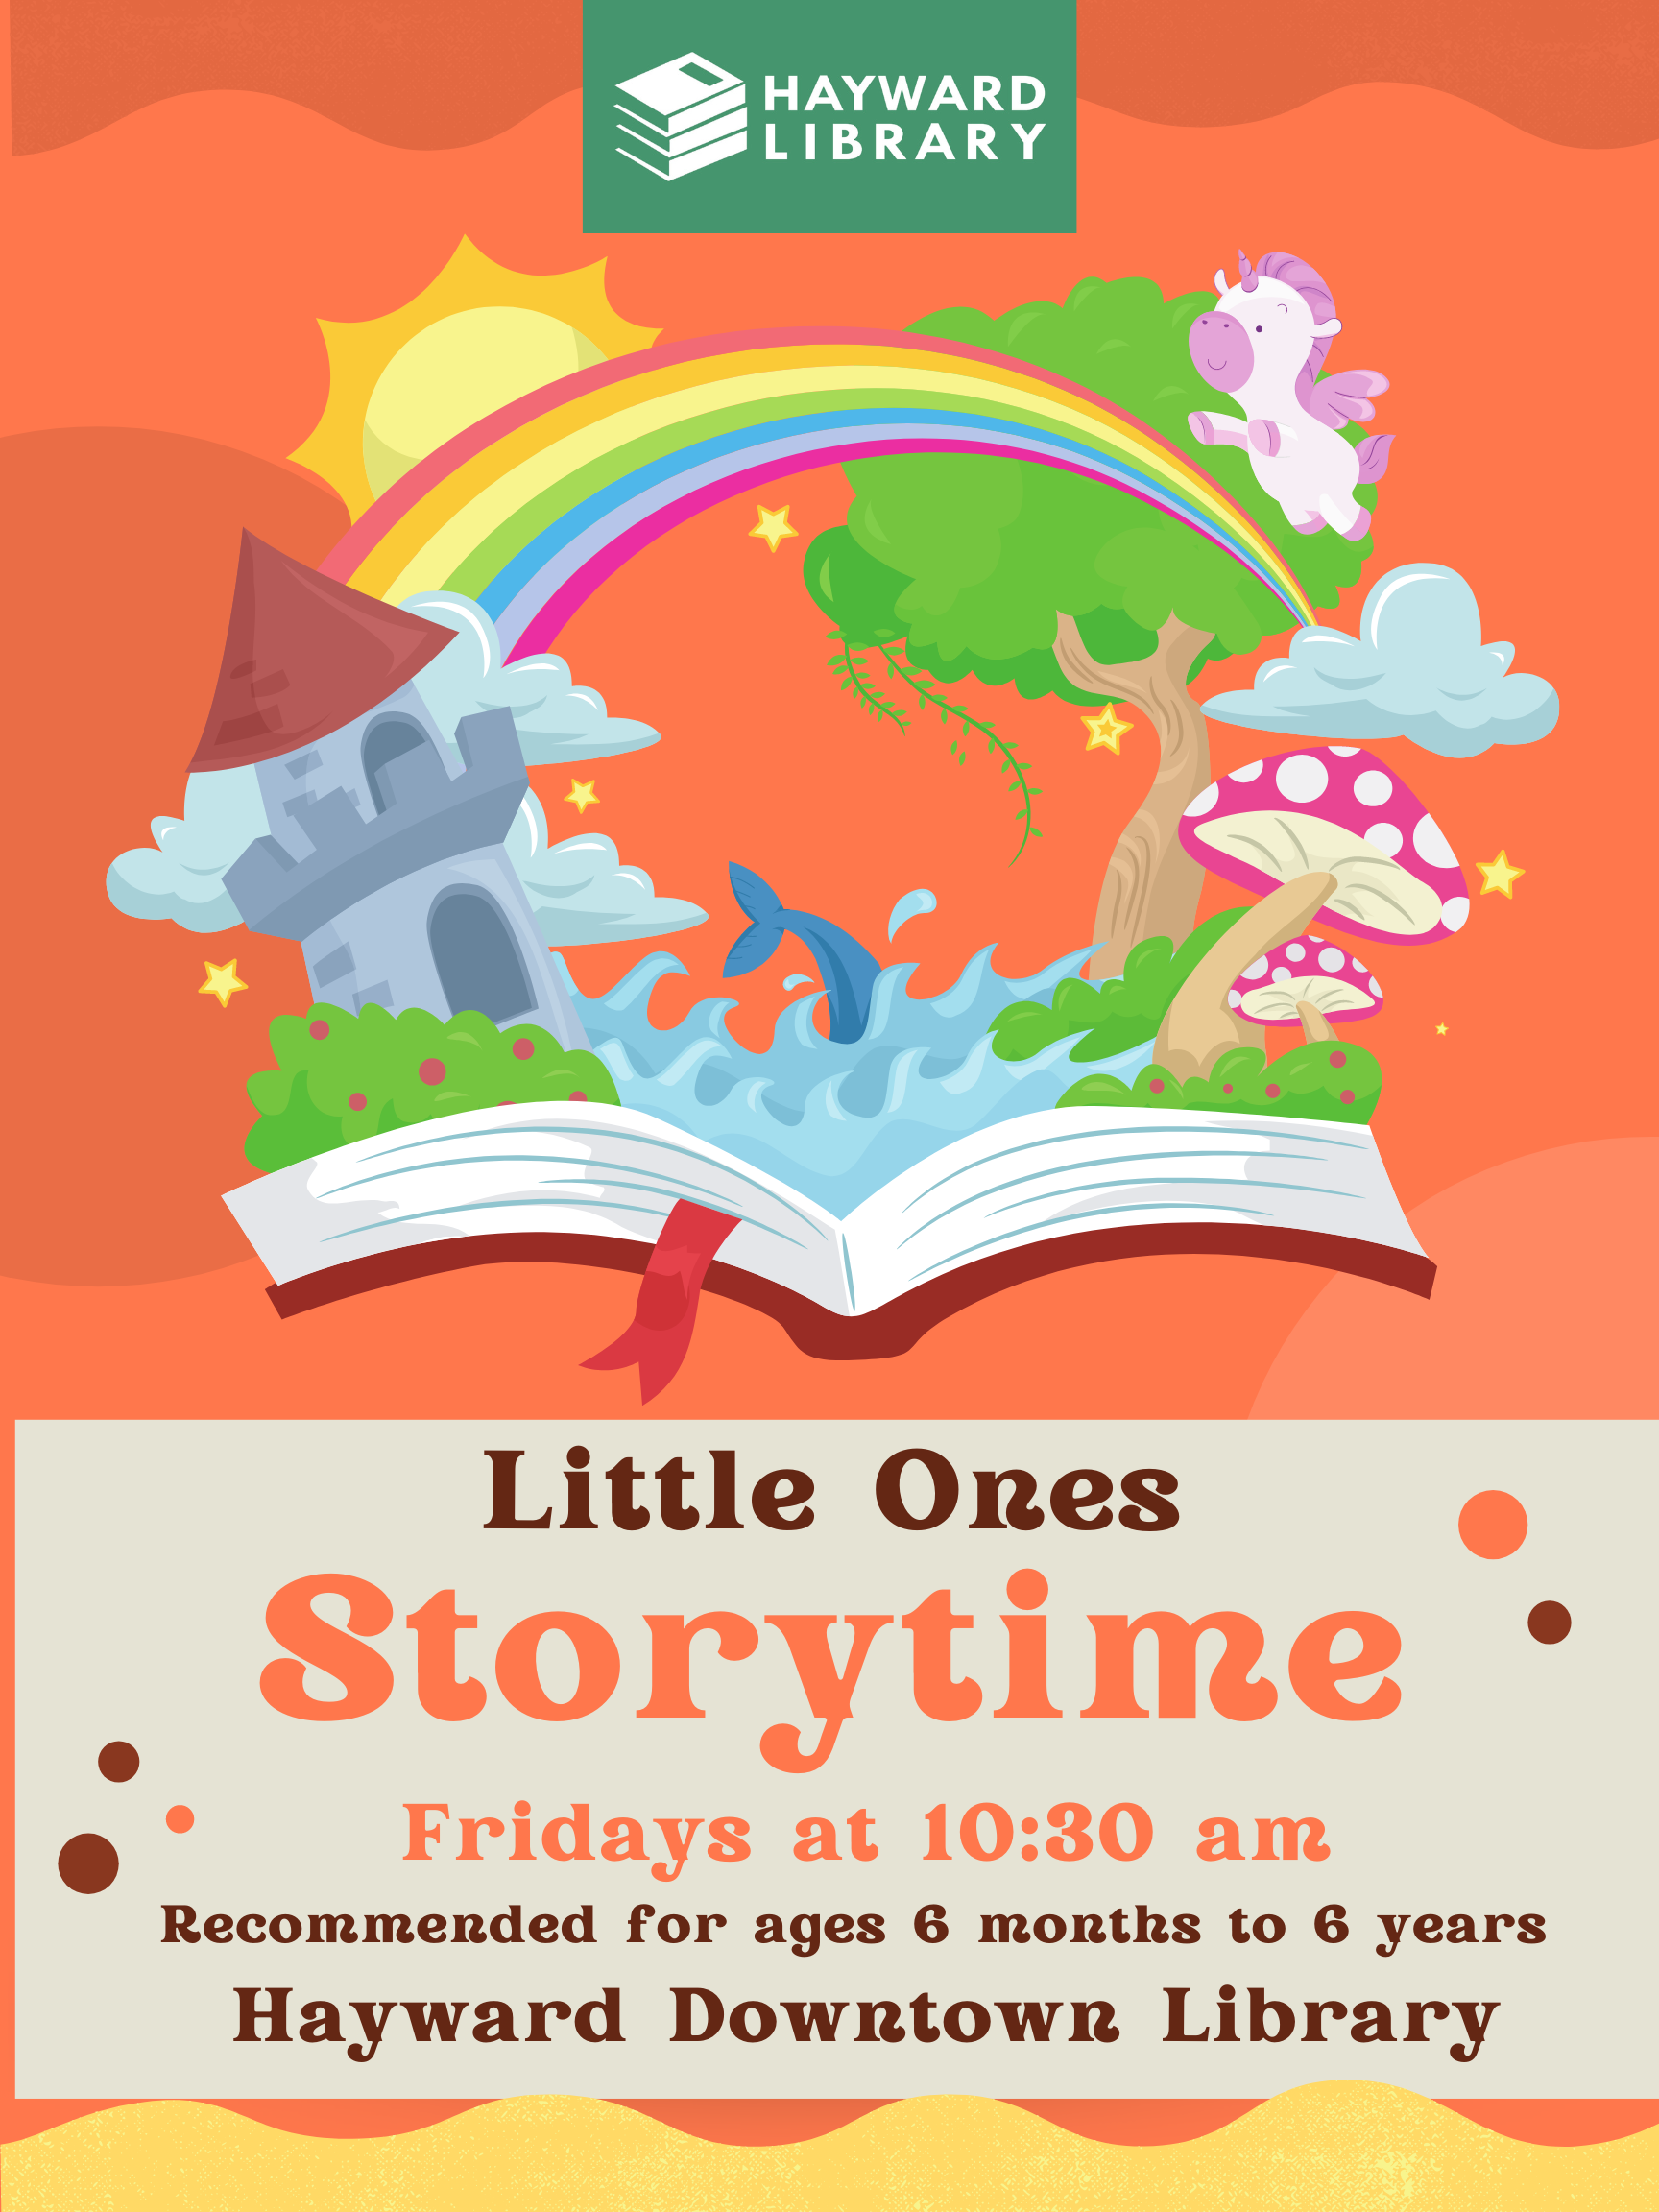 image description: orange background with a open book with a rainbow, sun and tree brown and orange text,. Text reads Hayward Public Library Little ones storytime recommended for ages 6m to 6years, Fridays at 10:30 hayward downtown library